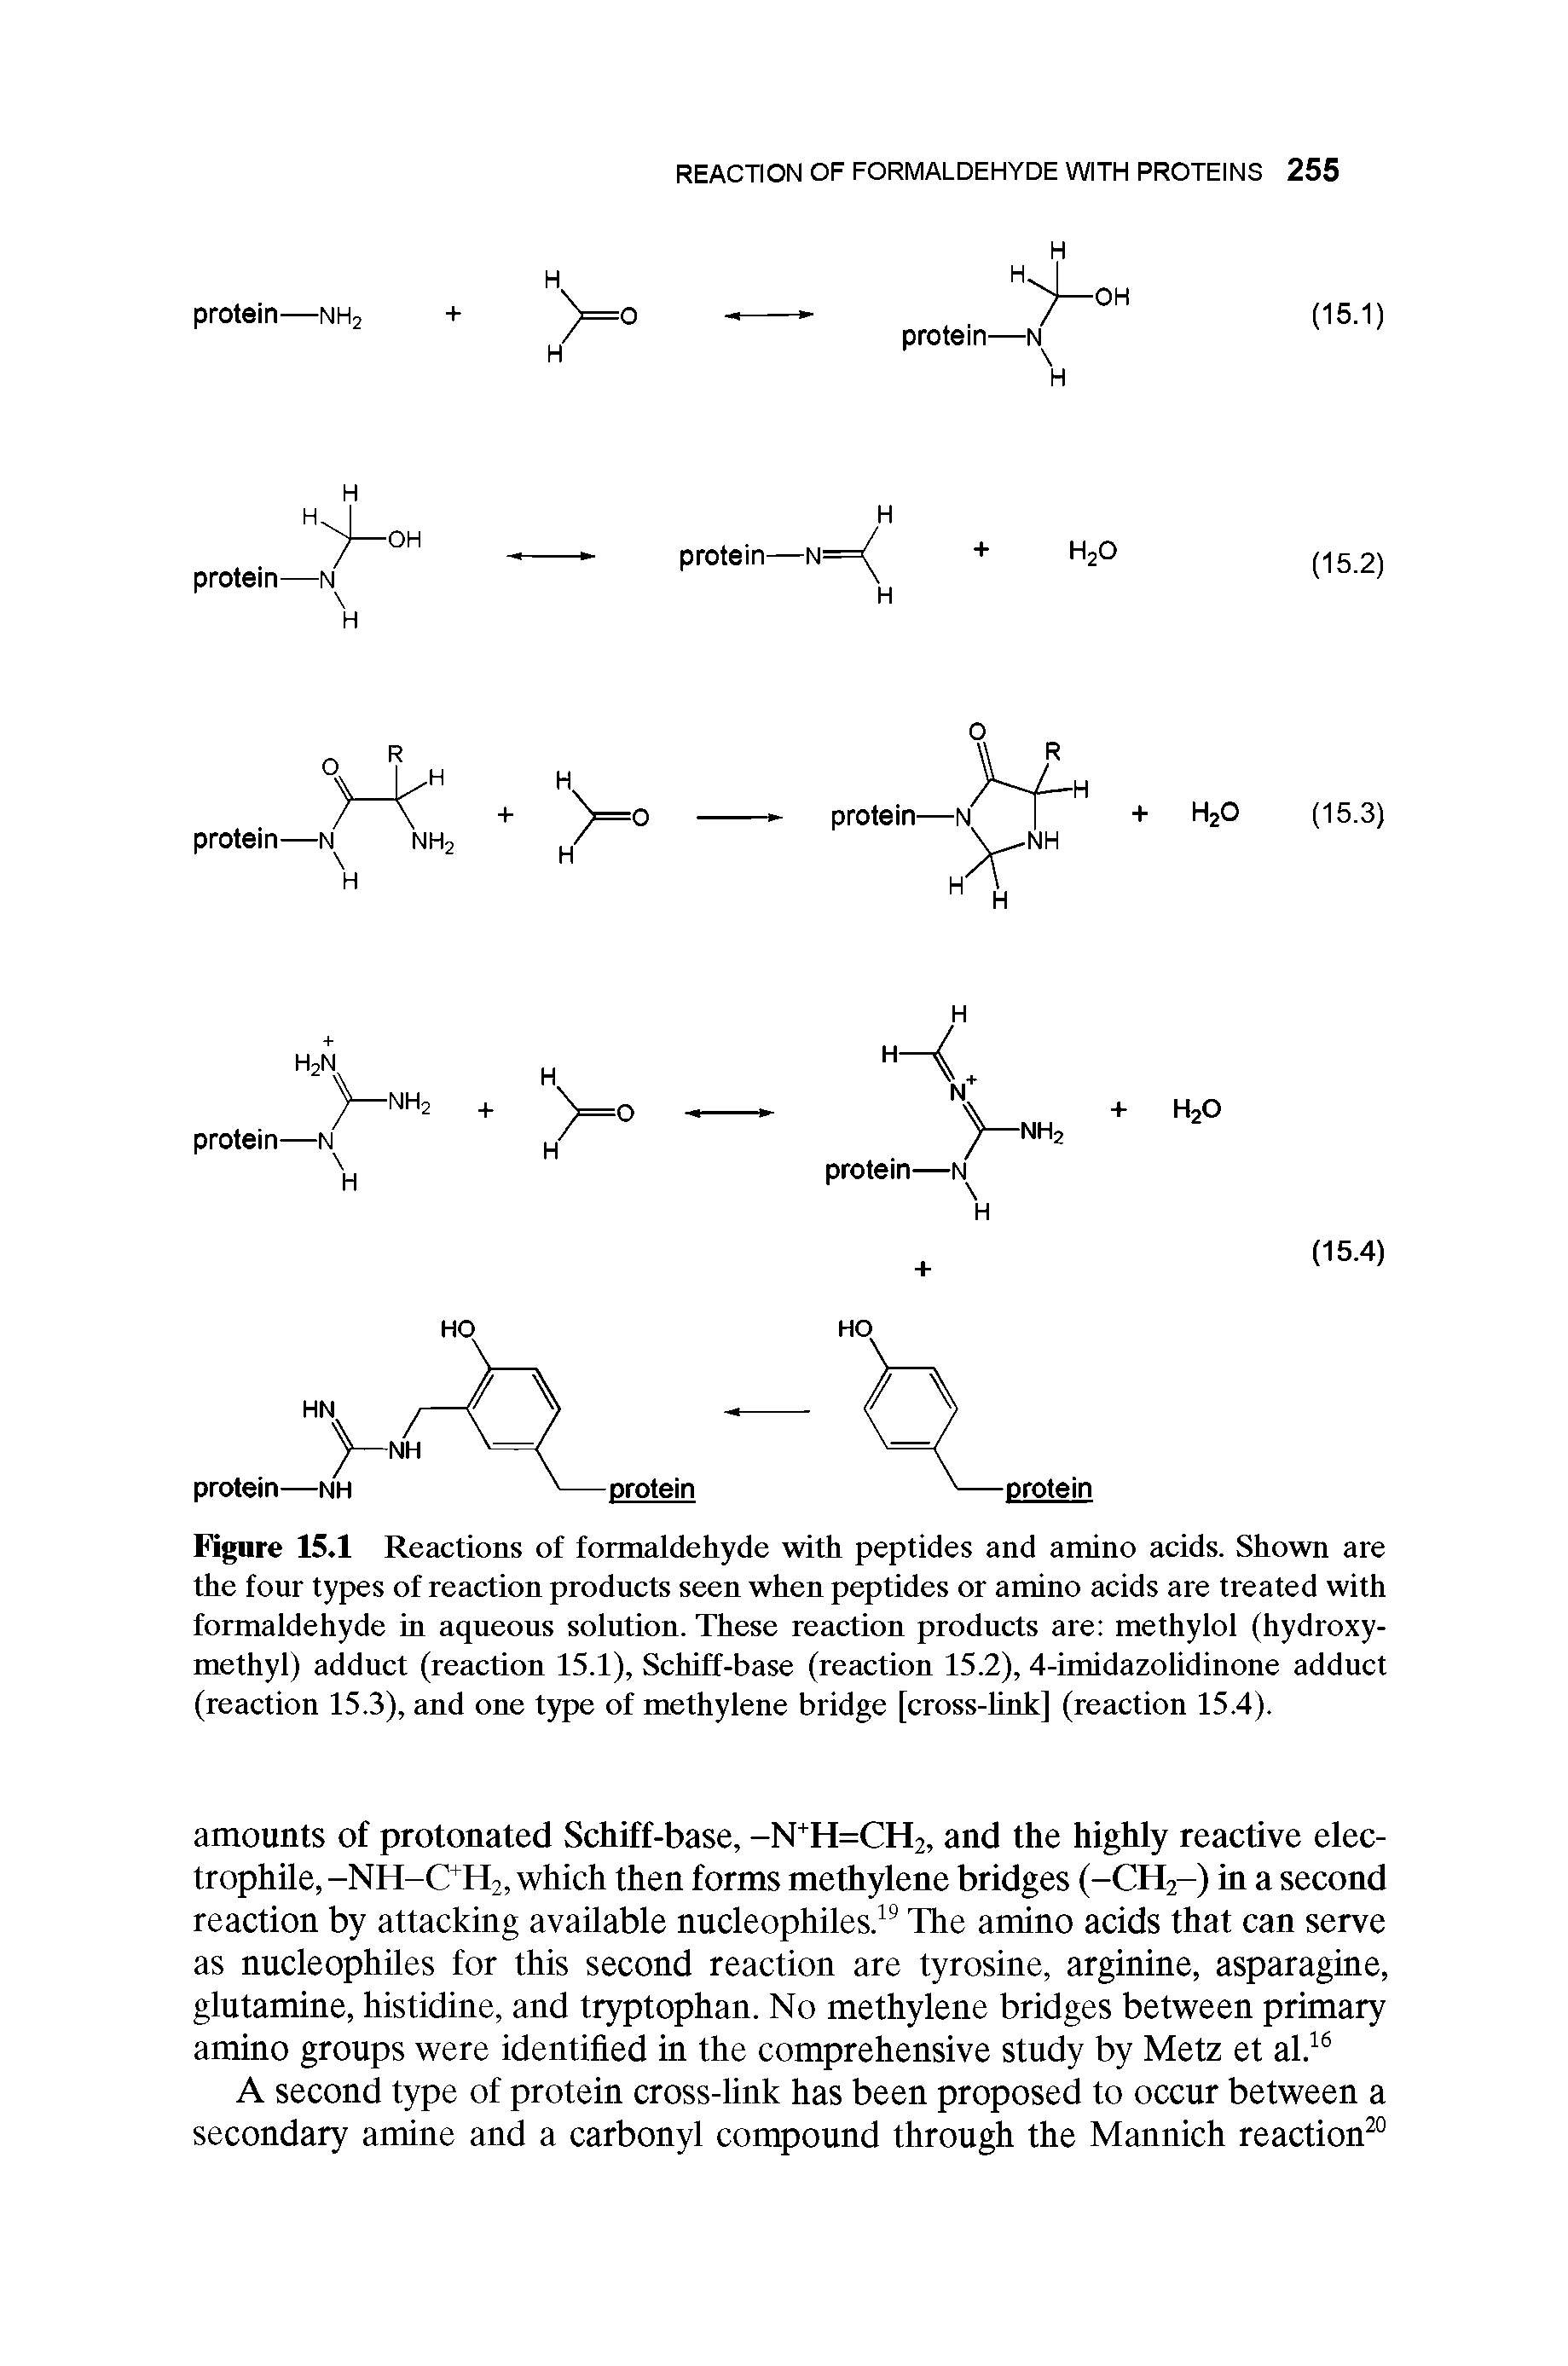 Figure 15.1 Reactions of formaldehyde with peptides and amino acids. Shown are the four types of reaction products seen when peptides or amino acids are treated with formaldehyde in aqueous solution. These reaction products are methylol (hydroxymethyl) adduct (reaction 15.1), Schiff-base (reaction 15.2), 4-imidazolidinone adduct (reaction 15.3), and one type of methylene bridge [cross-link] (reaction 15.4).